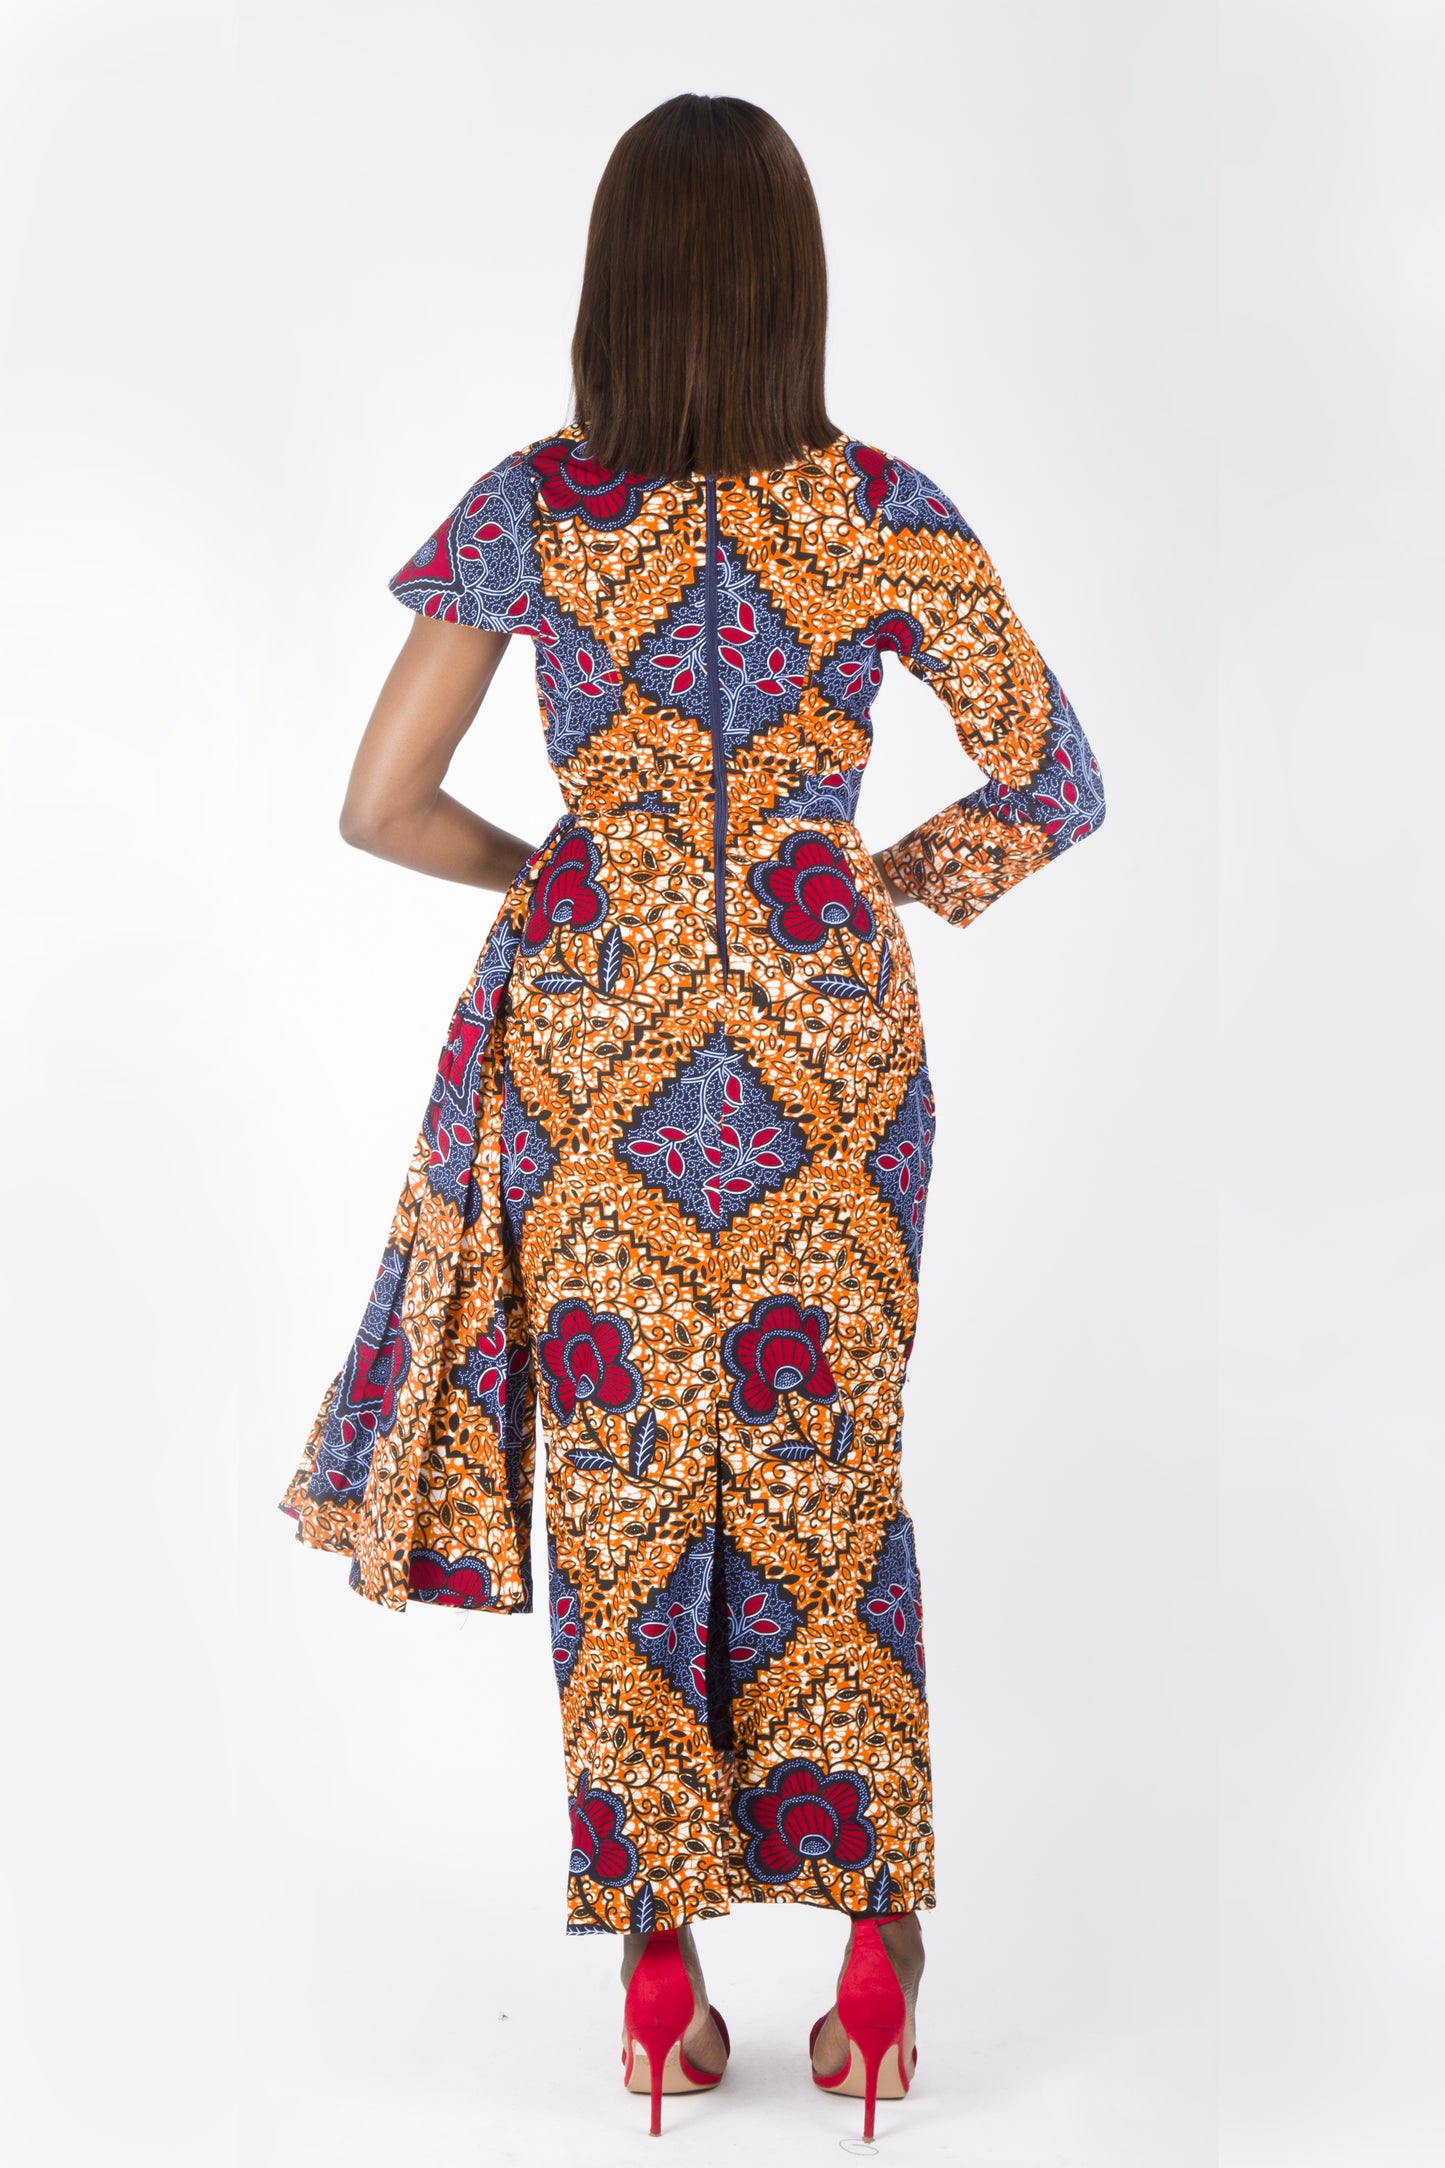 BROWN BLUE AFRICAN ANKARA PRINT PLUS SIZE CLOTHING PARTY DRESS